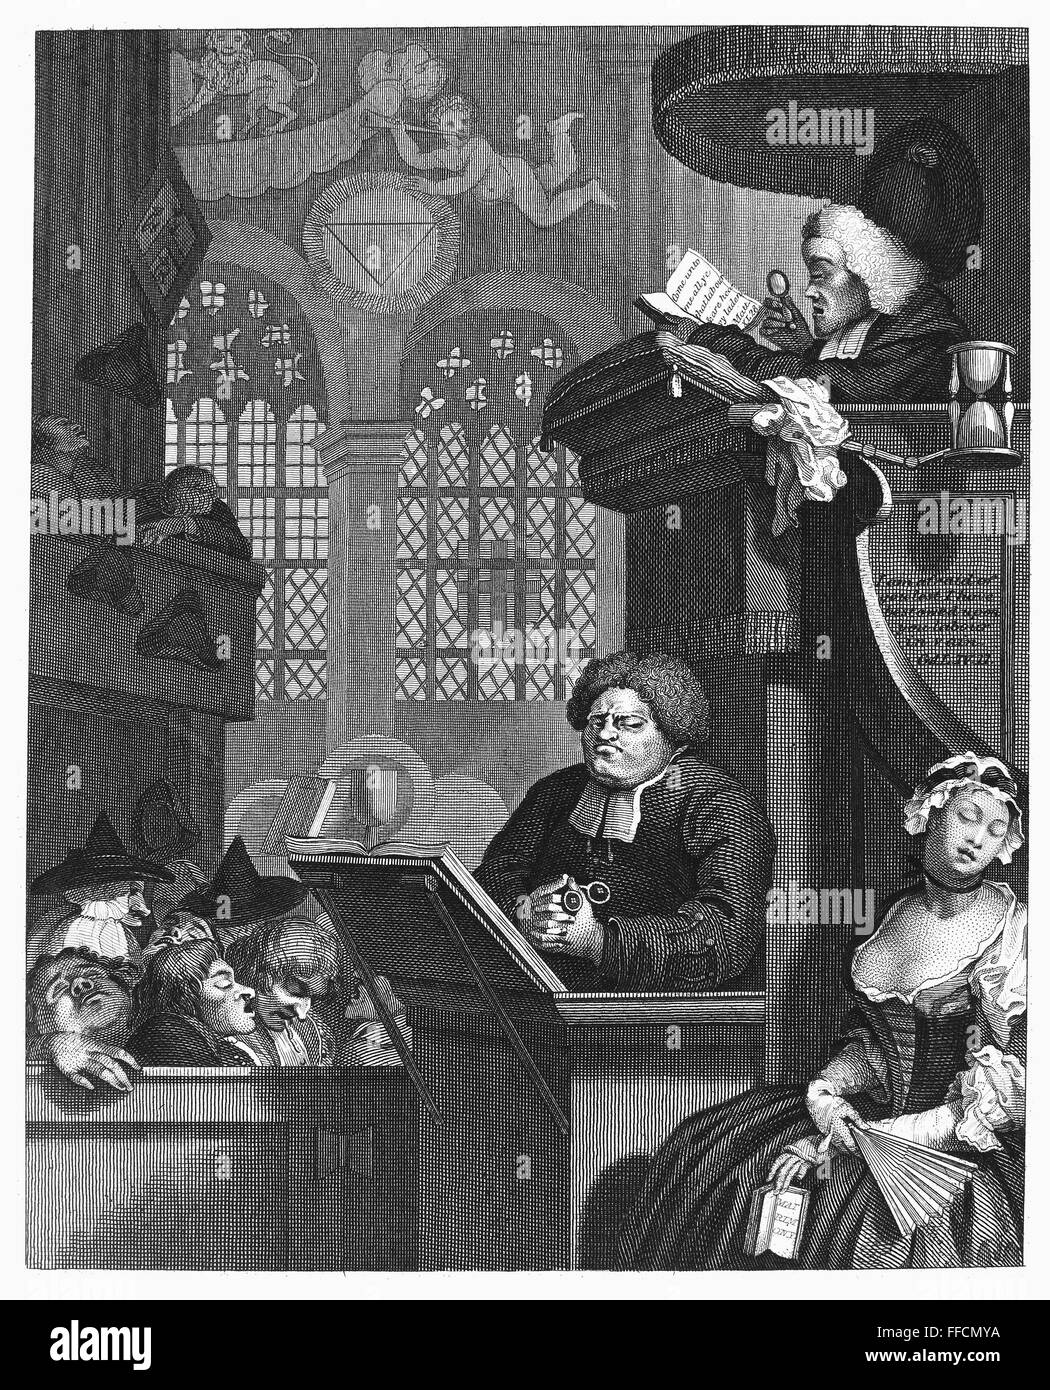 HOGARTH: CHURCH SATIRE. /nThe Sleeping Congregation. Steel engraving, after an 18th-century drawing by William Hogarth. Stock Photo